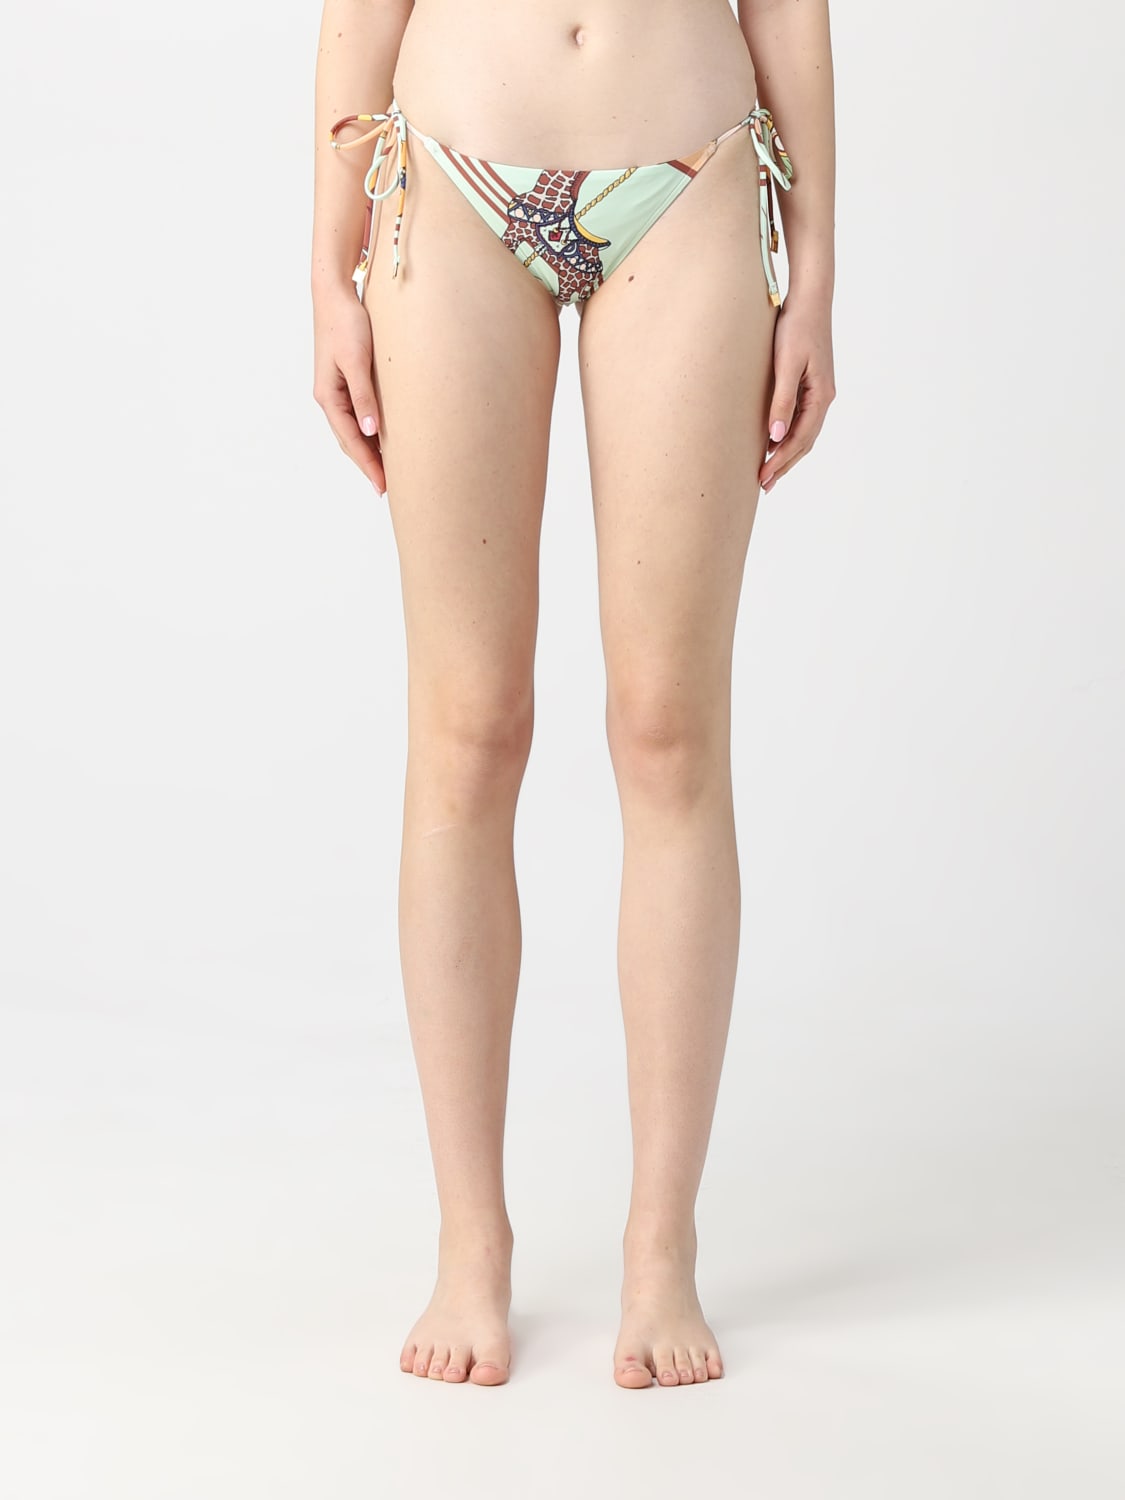 Swimsuit Tory Burch: Tory Burch swimsuit for women multicolor 2